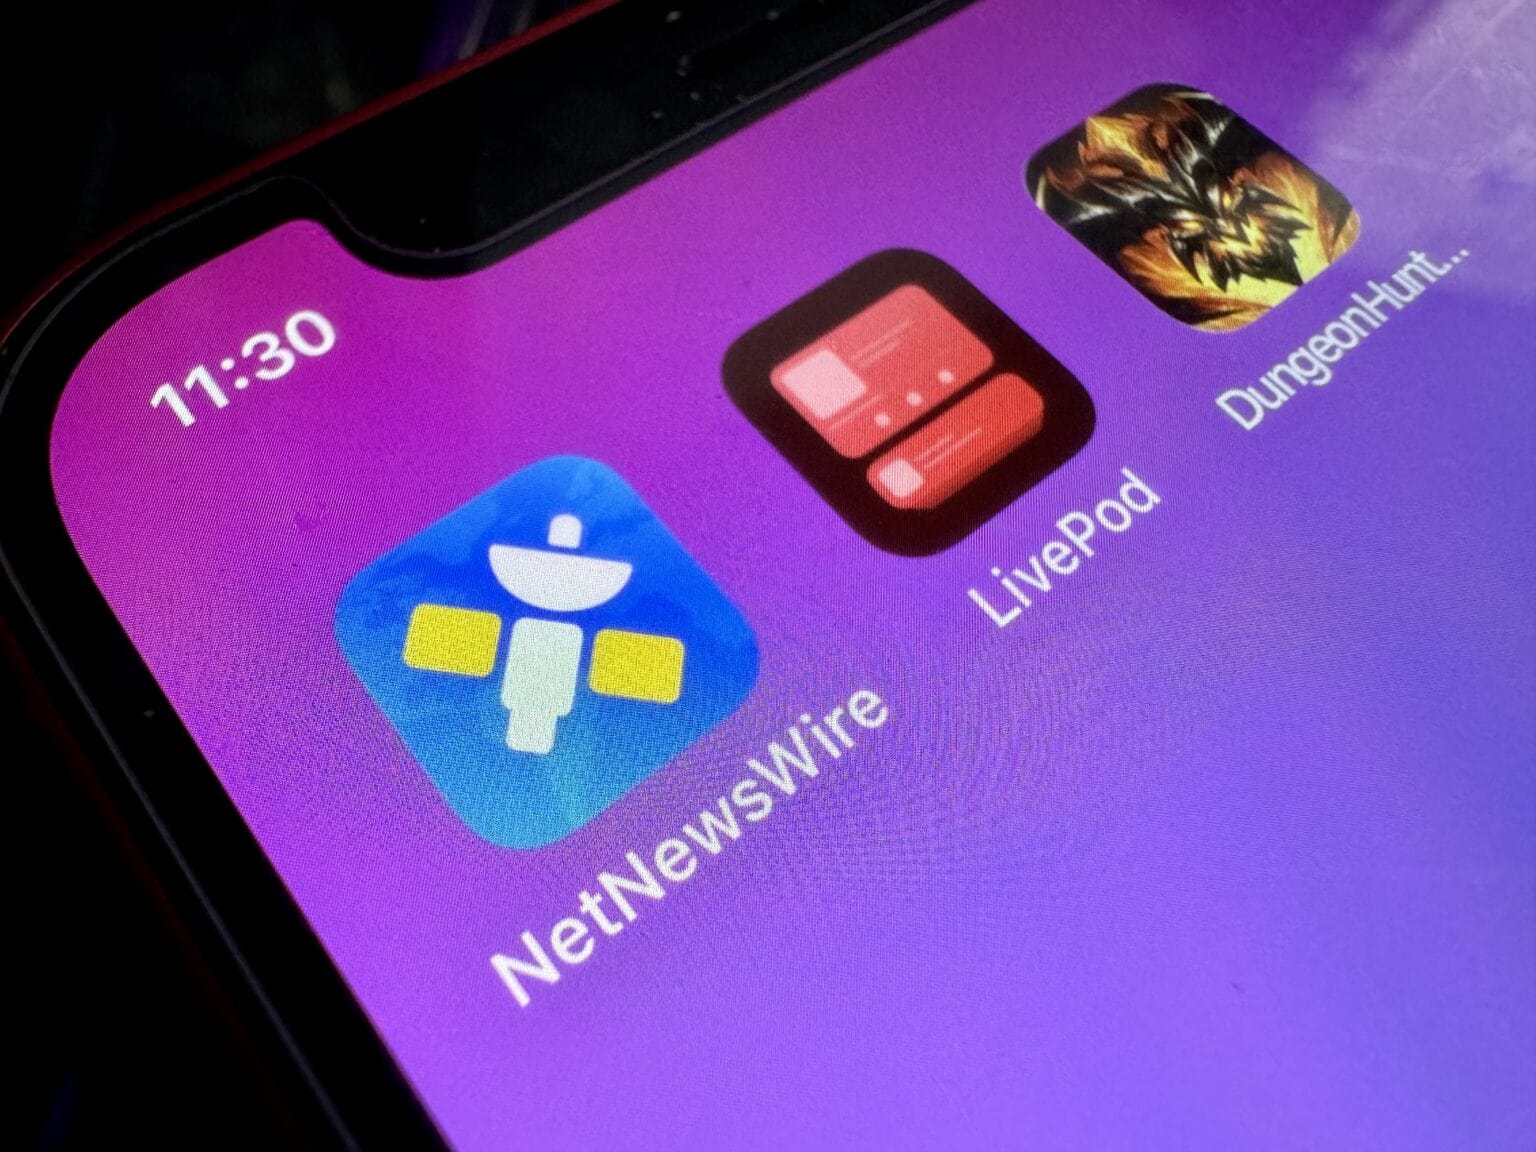 This week’s Awesome Apps: NetNewsWire, LivePod and Dungeon Hunter 6.